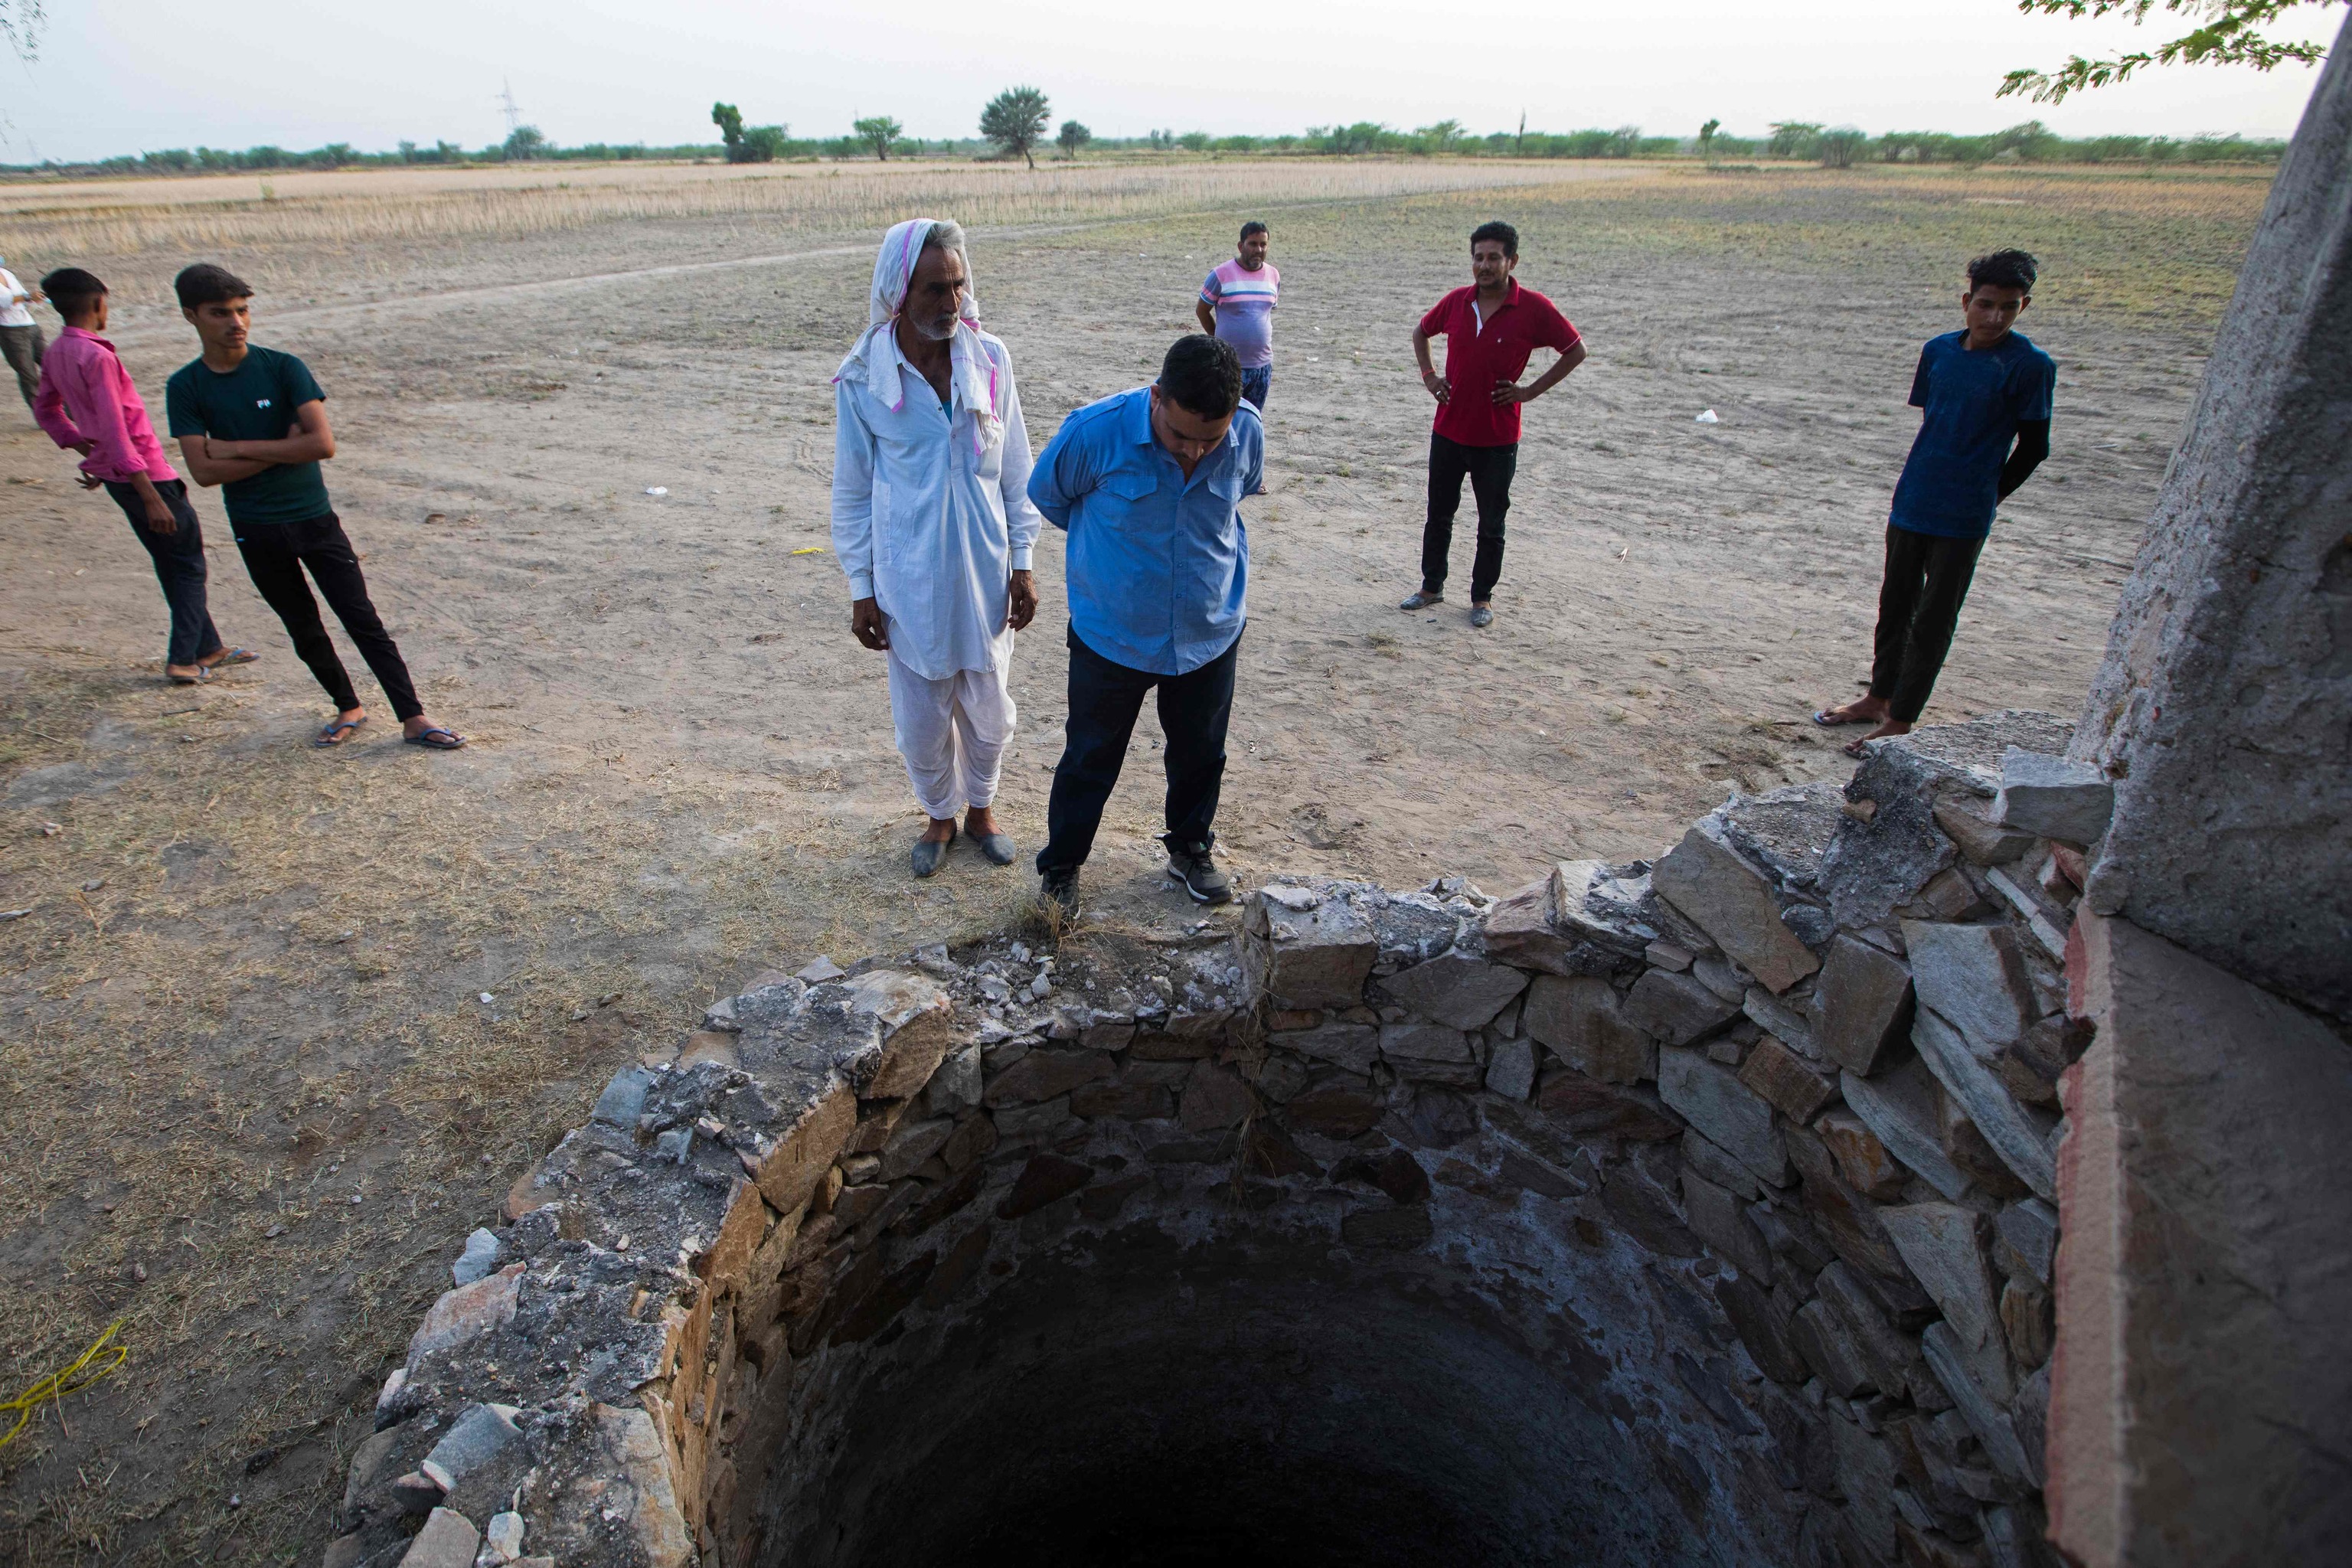 Farmer Sardar Meena (Center L) stands near the well where his three married daughters and two grandchildren were found dead in a well in Dudu village in the Indian state of Rajasthan on May 28.